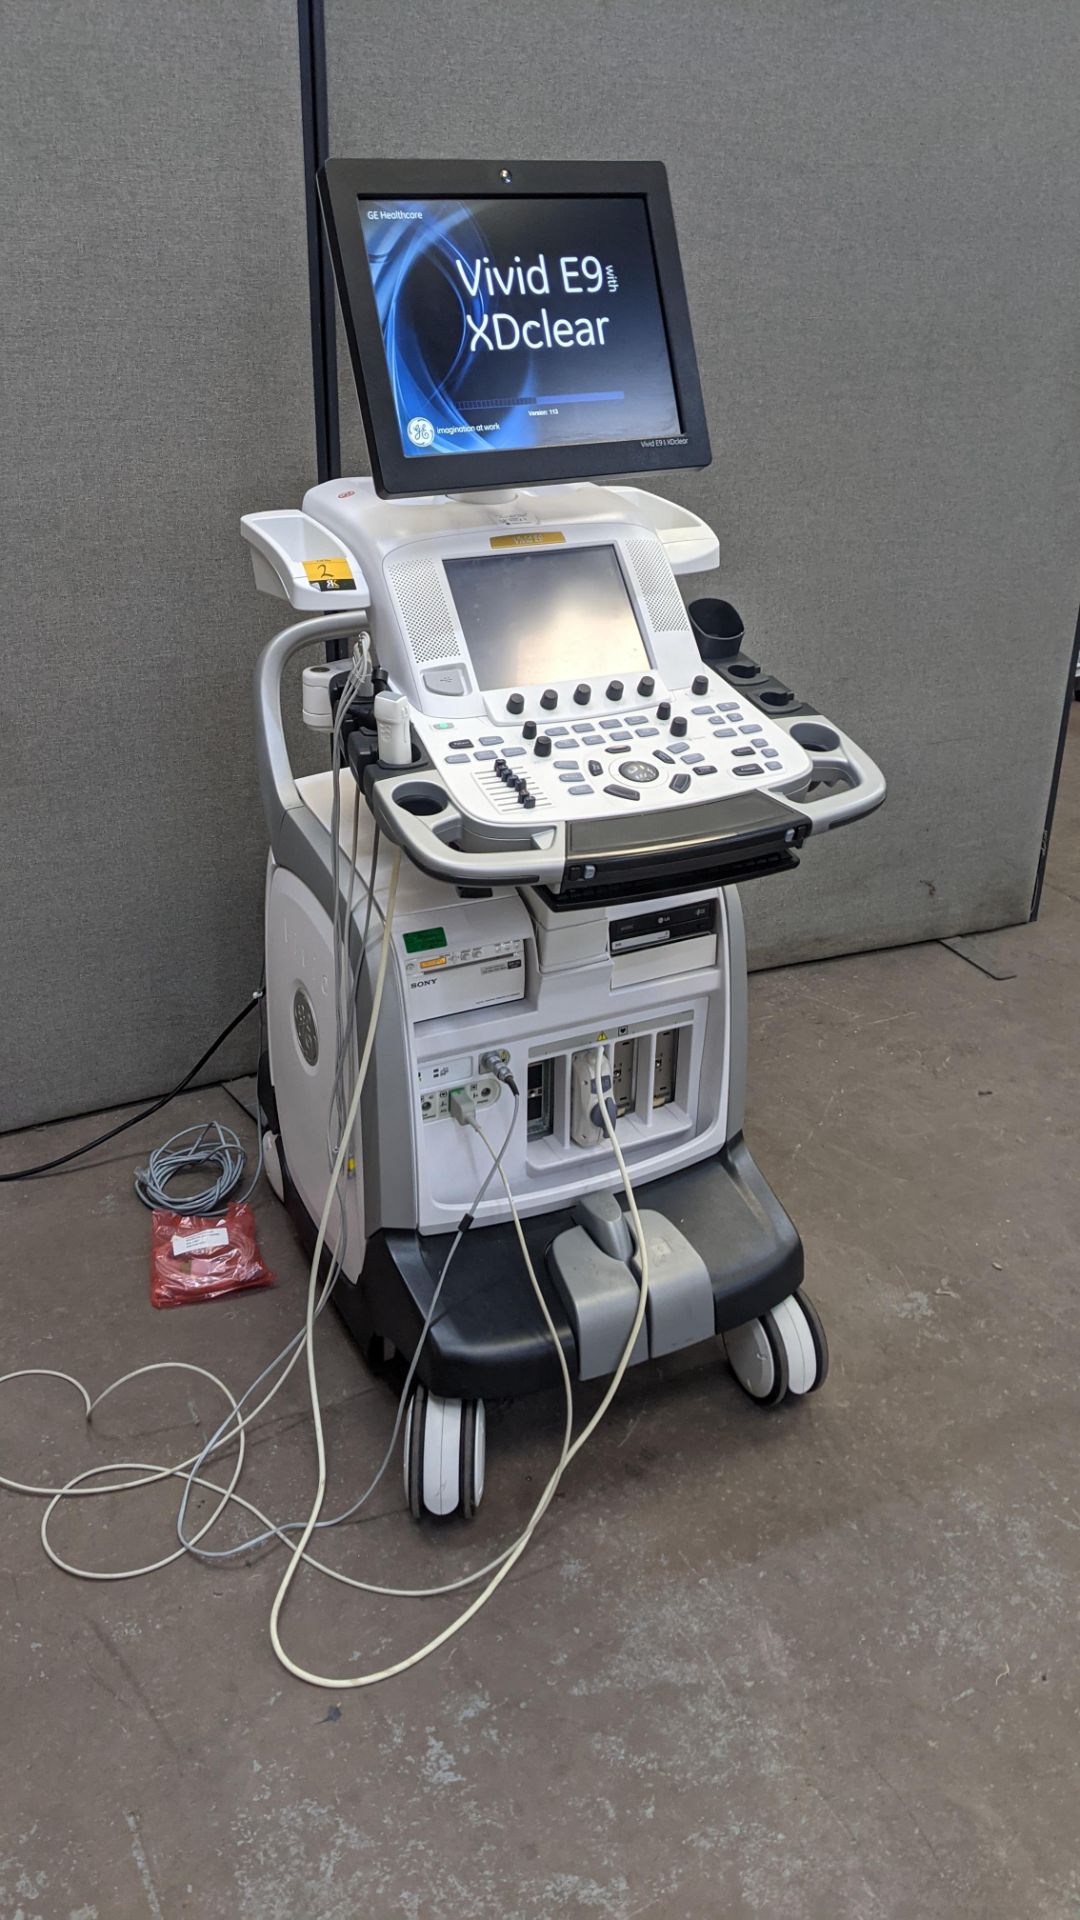 General Electric Vivid E9 cardiovascular ultrasound system. - Image 4 of 66